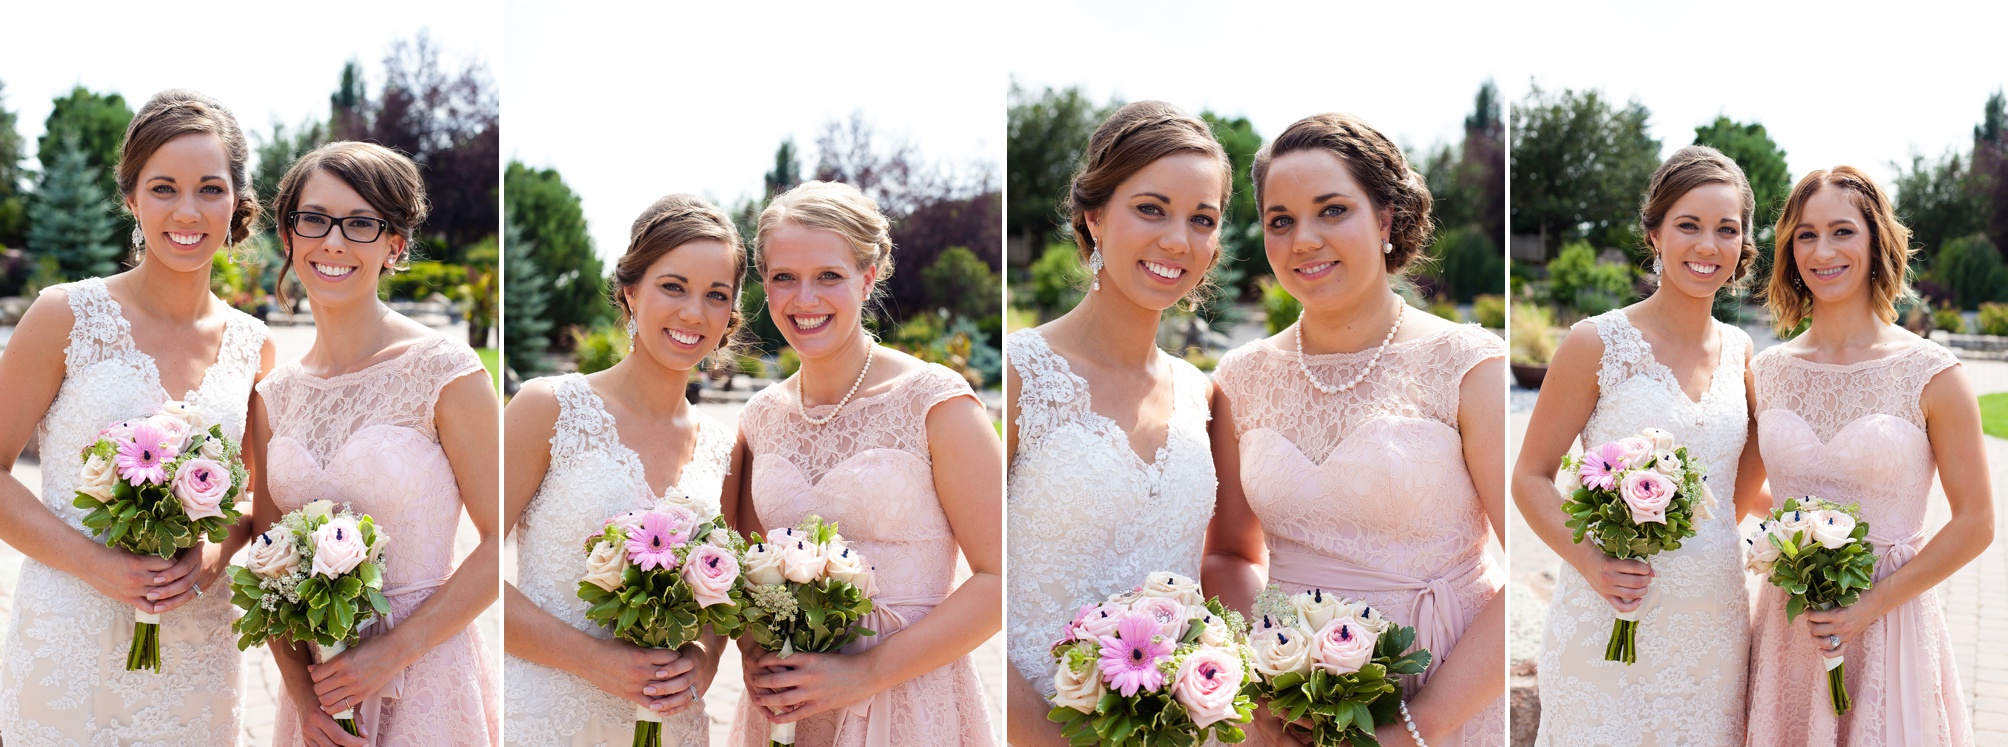 Ben and Lachelle's classy blush pink and navy blue outdoor summer wedding